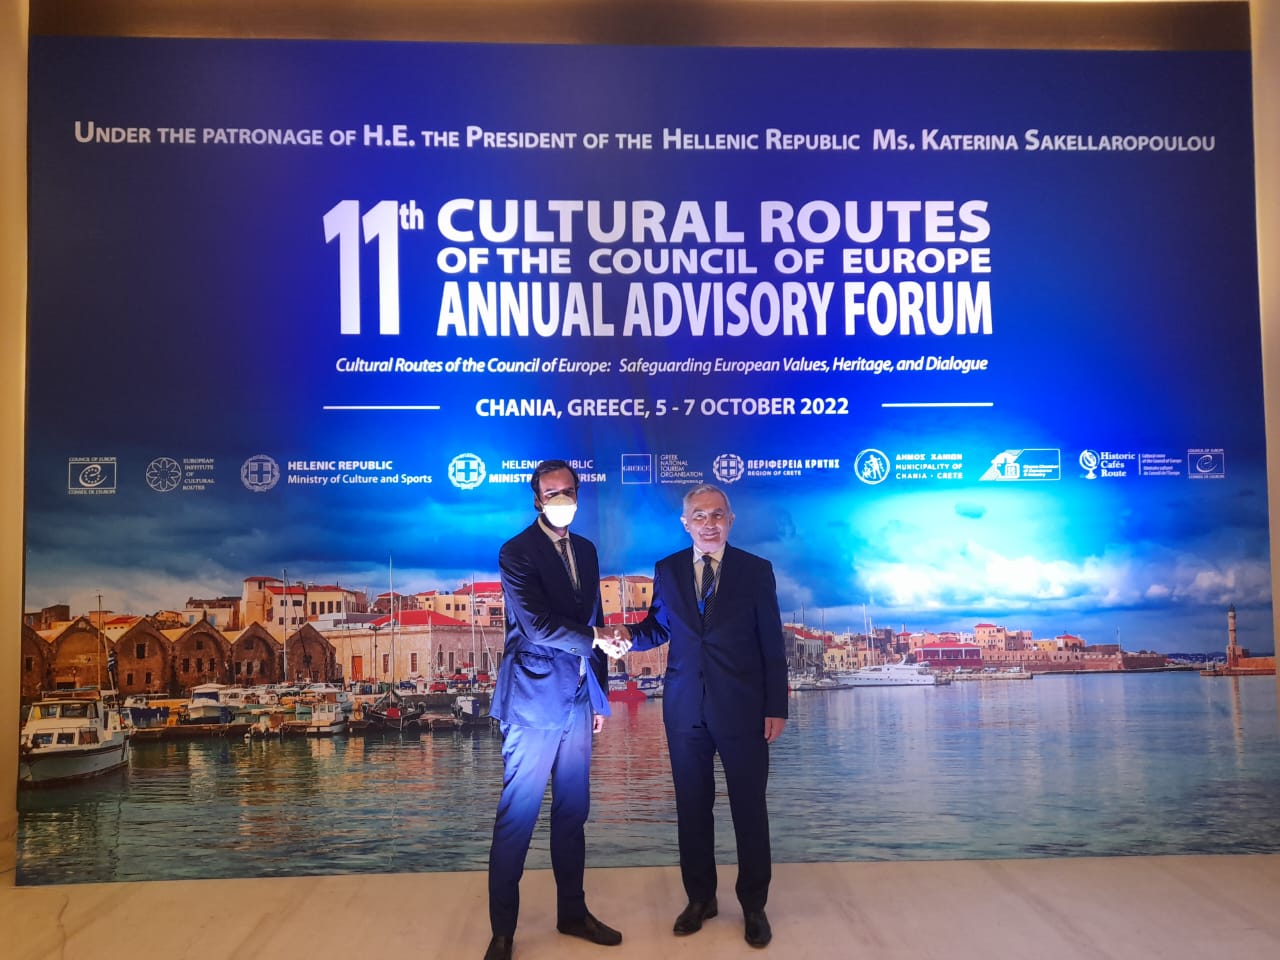 11th-annual-advisory-forum-on-cultural-routes-of-the-council-of-europe-chania-greece-5-7-october-2022_52410644793_o